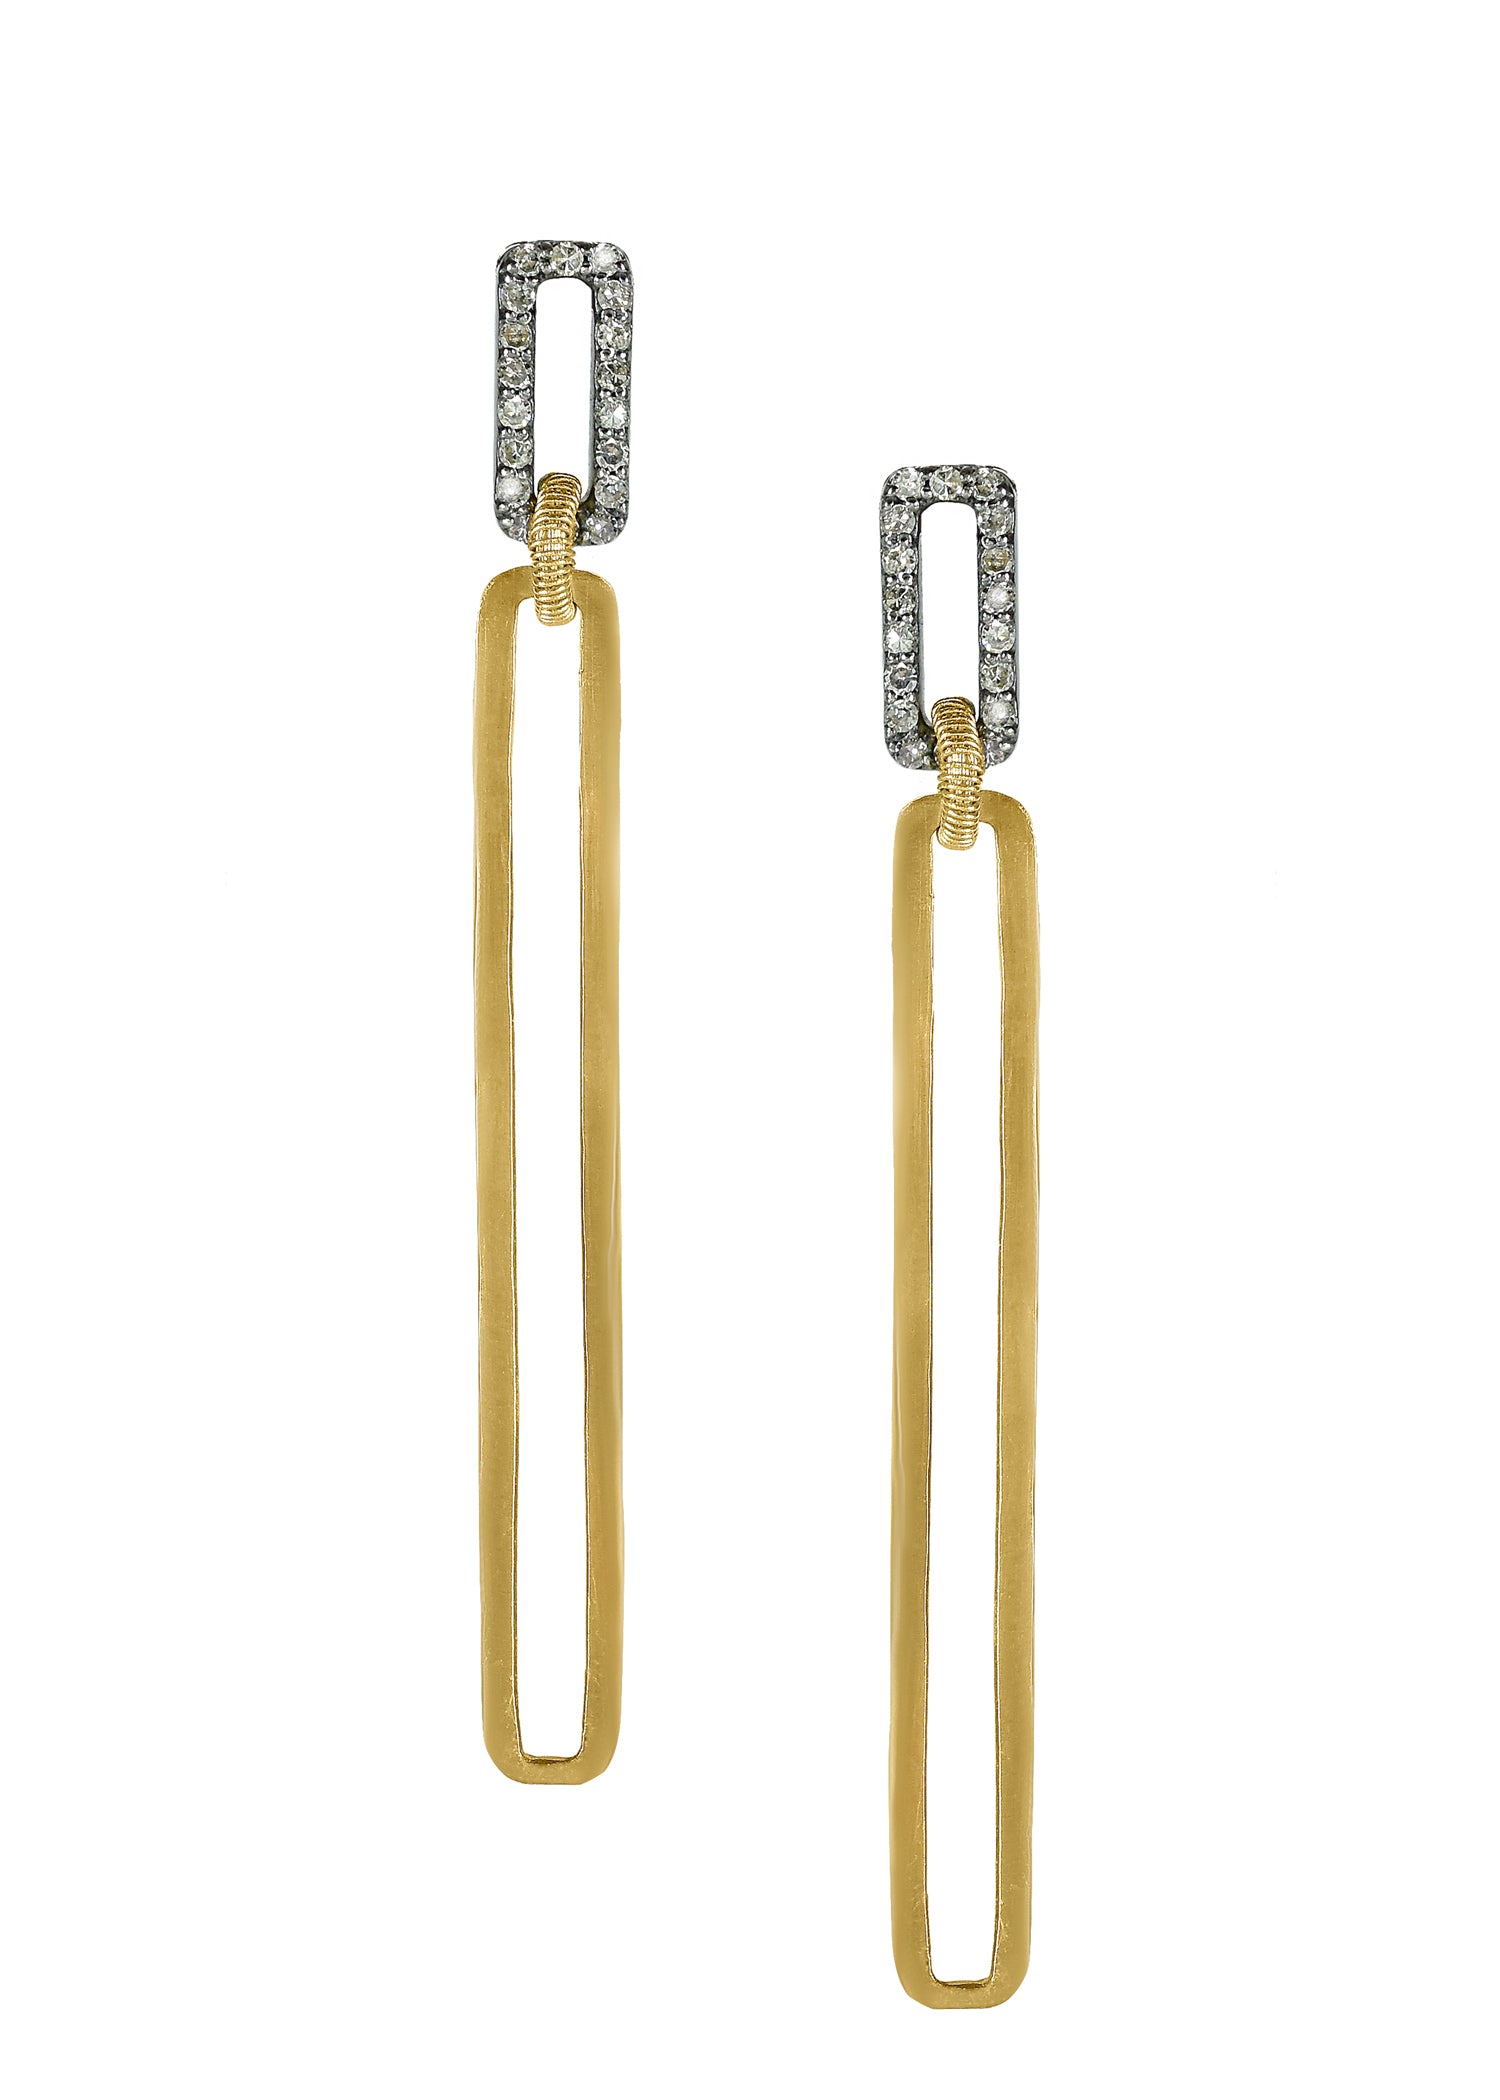 Diamond 14k gold Sterling silver Mixed metal Special order only Earrings measure 2" in length (including the posts) and 3/16" in width Handmade in our Los Angeles studio 